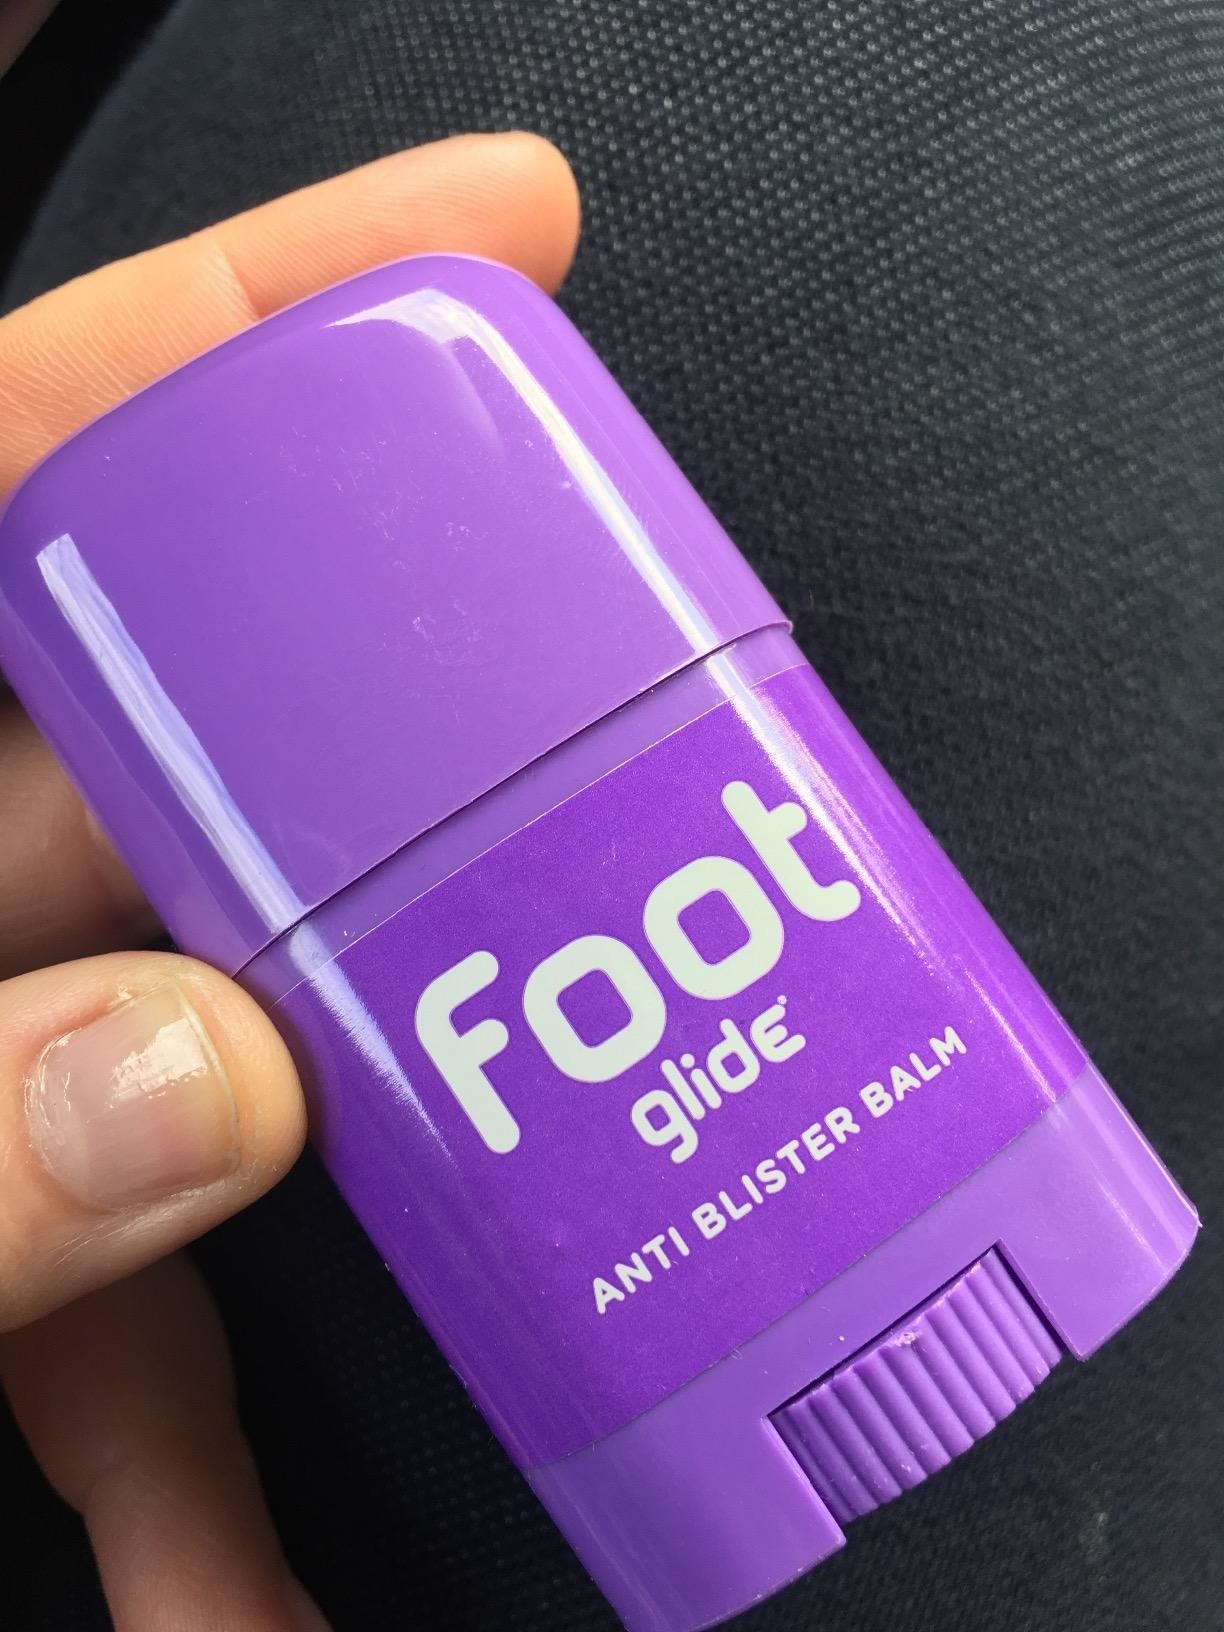 reviewer&#x27;s hand holding the roll on foot glide anti blister balm